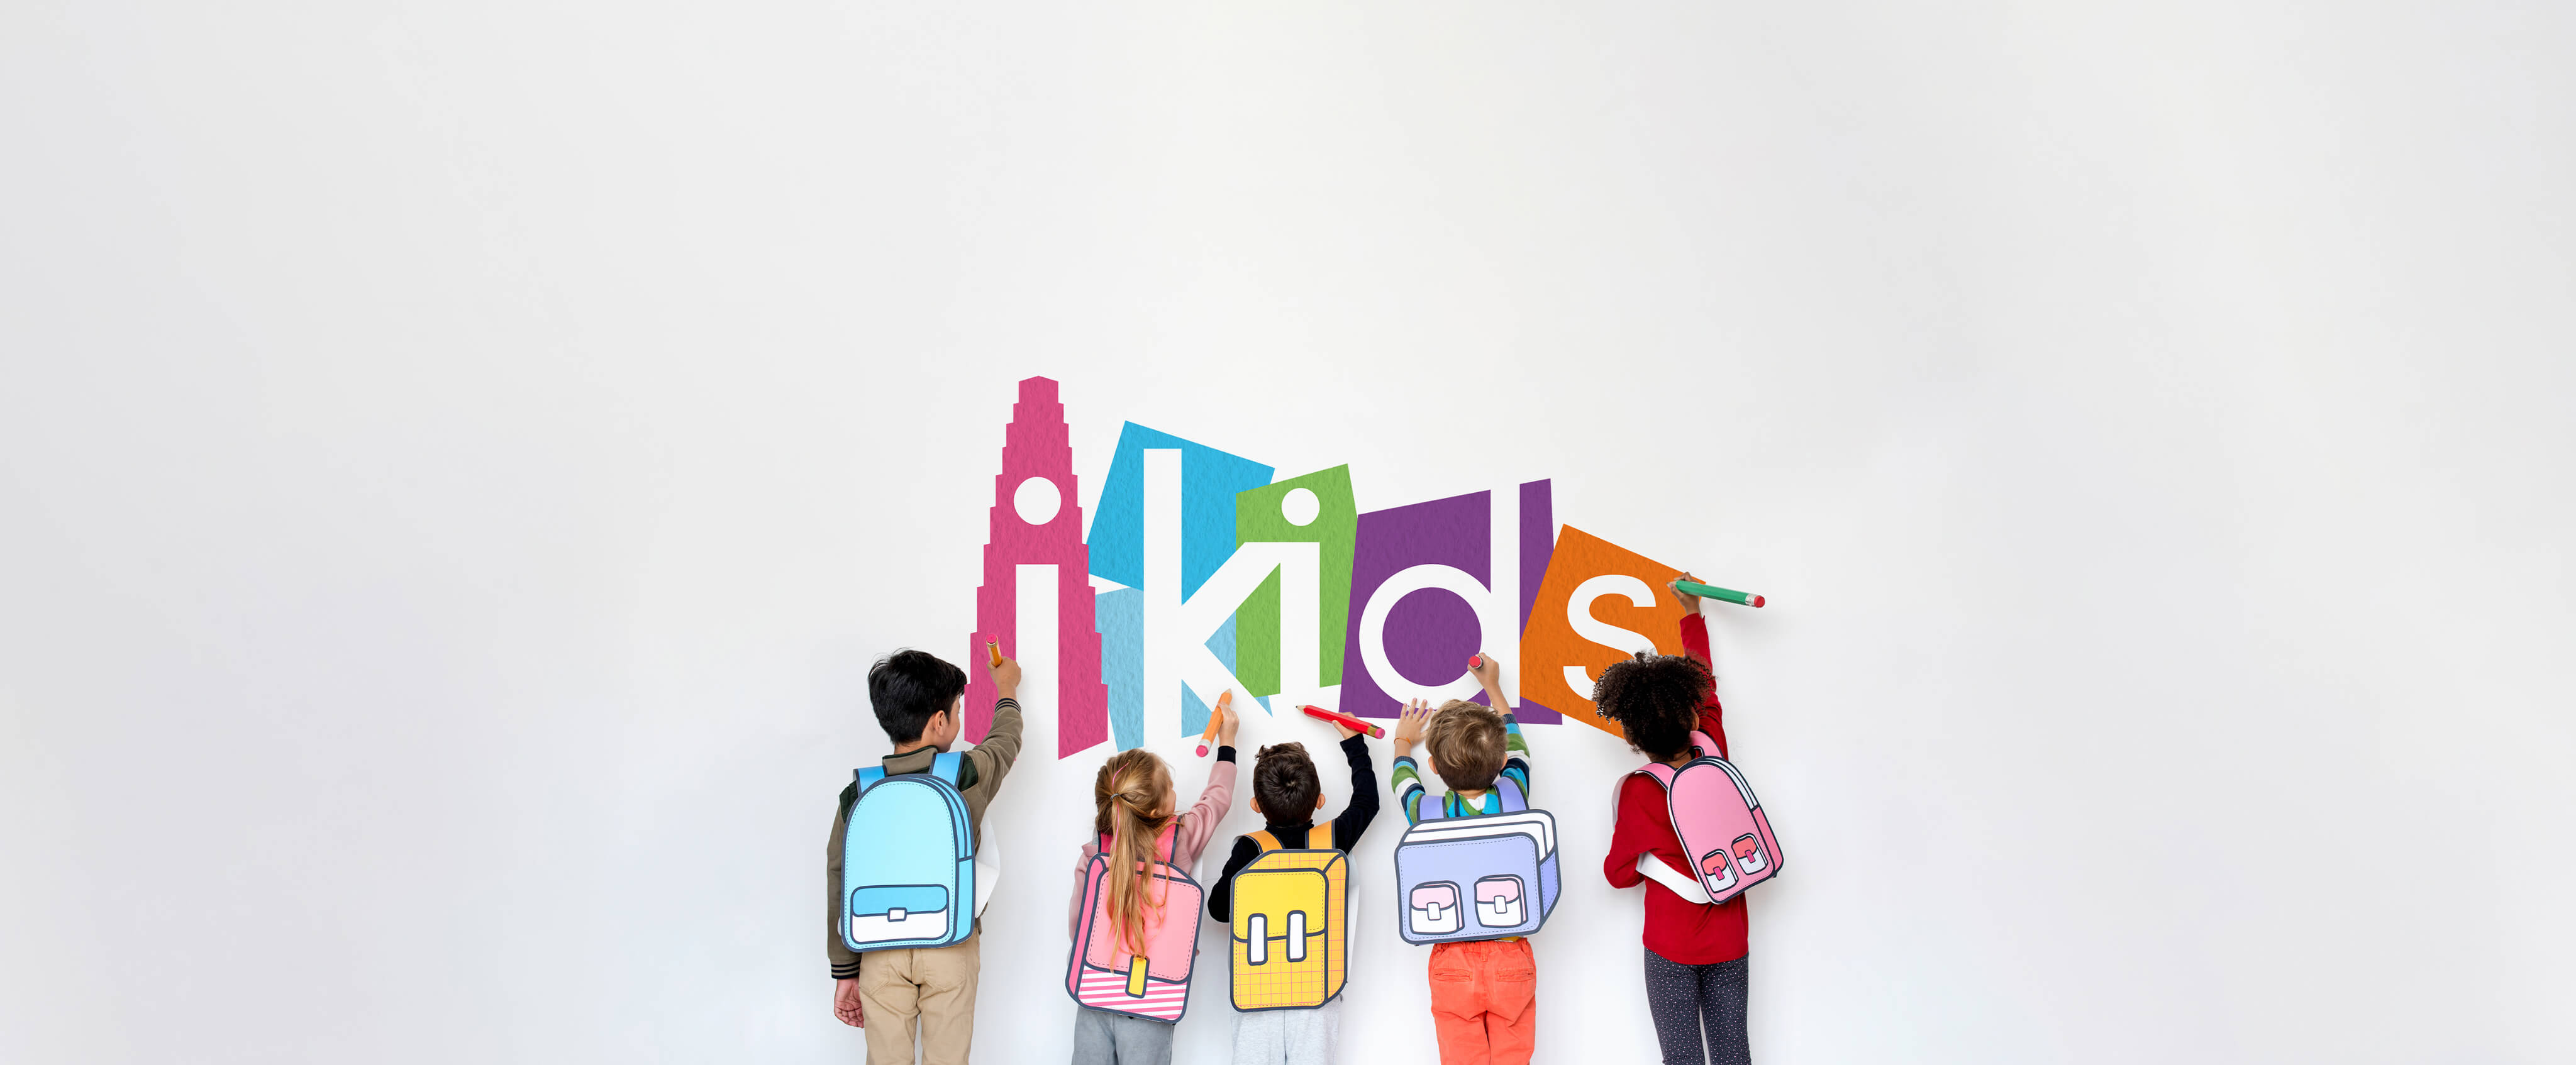 iKids Montessori Academy is located in Richmond Hill, Ontario. iKids strives to deliver stimulating learning experiences in a safe environment that enhances children’s physical, mental, emotional, and intellectual development. Our program combines the Montessori pedagogy and play-based learning model.